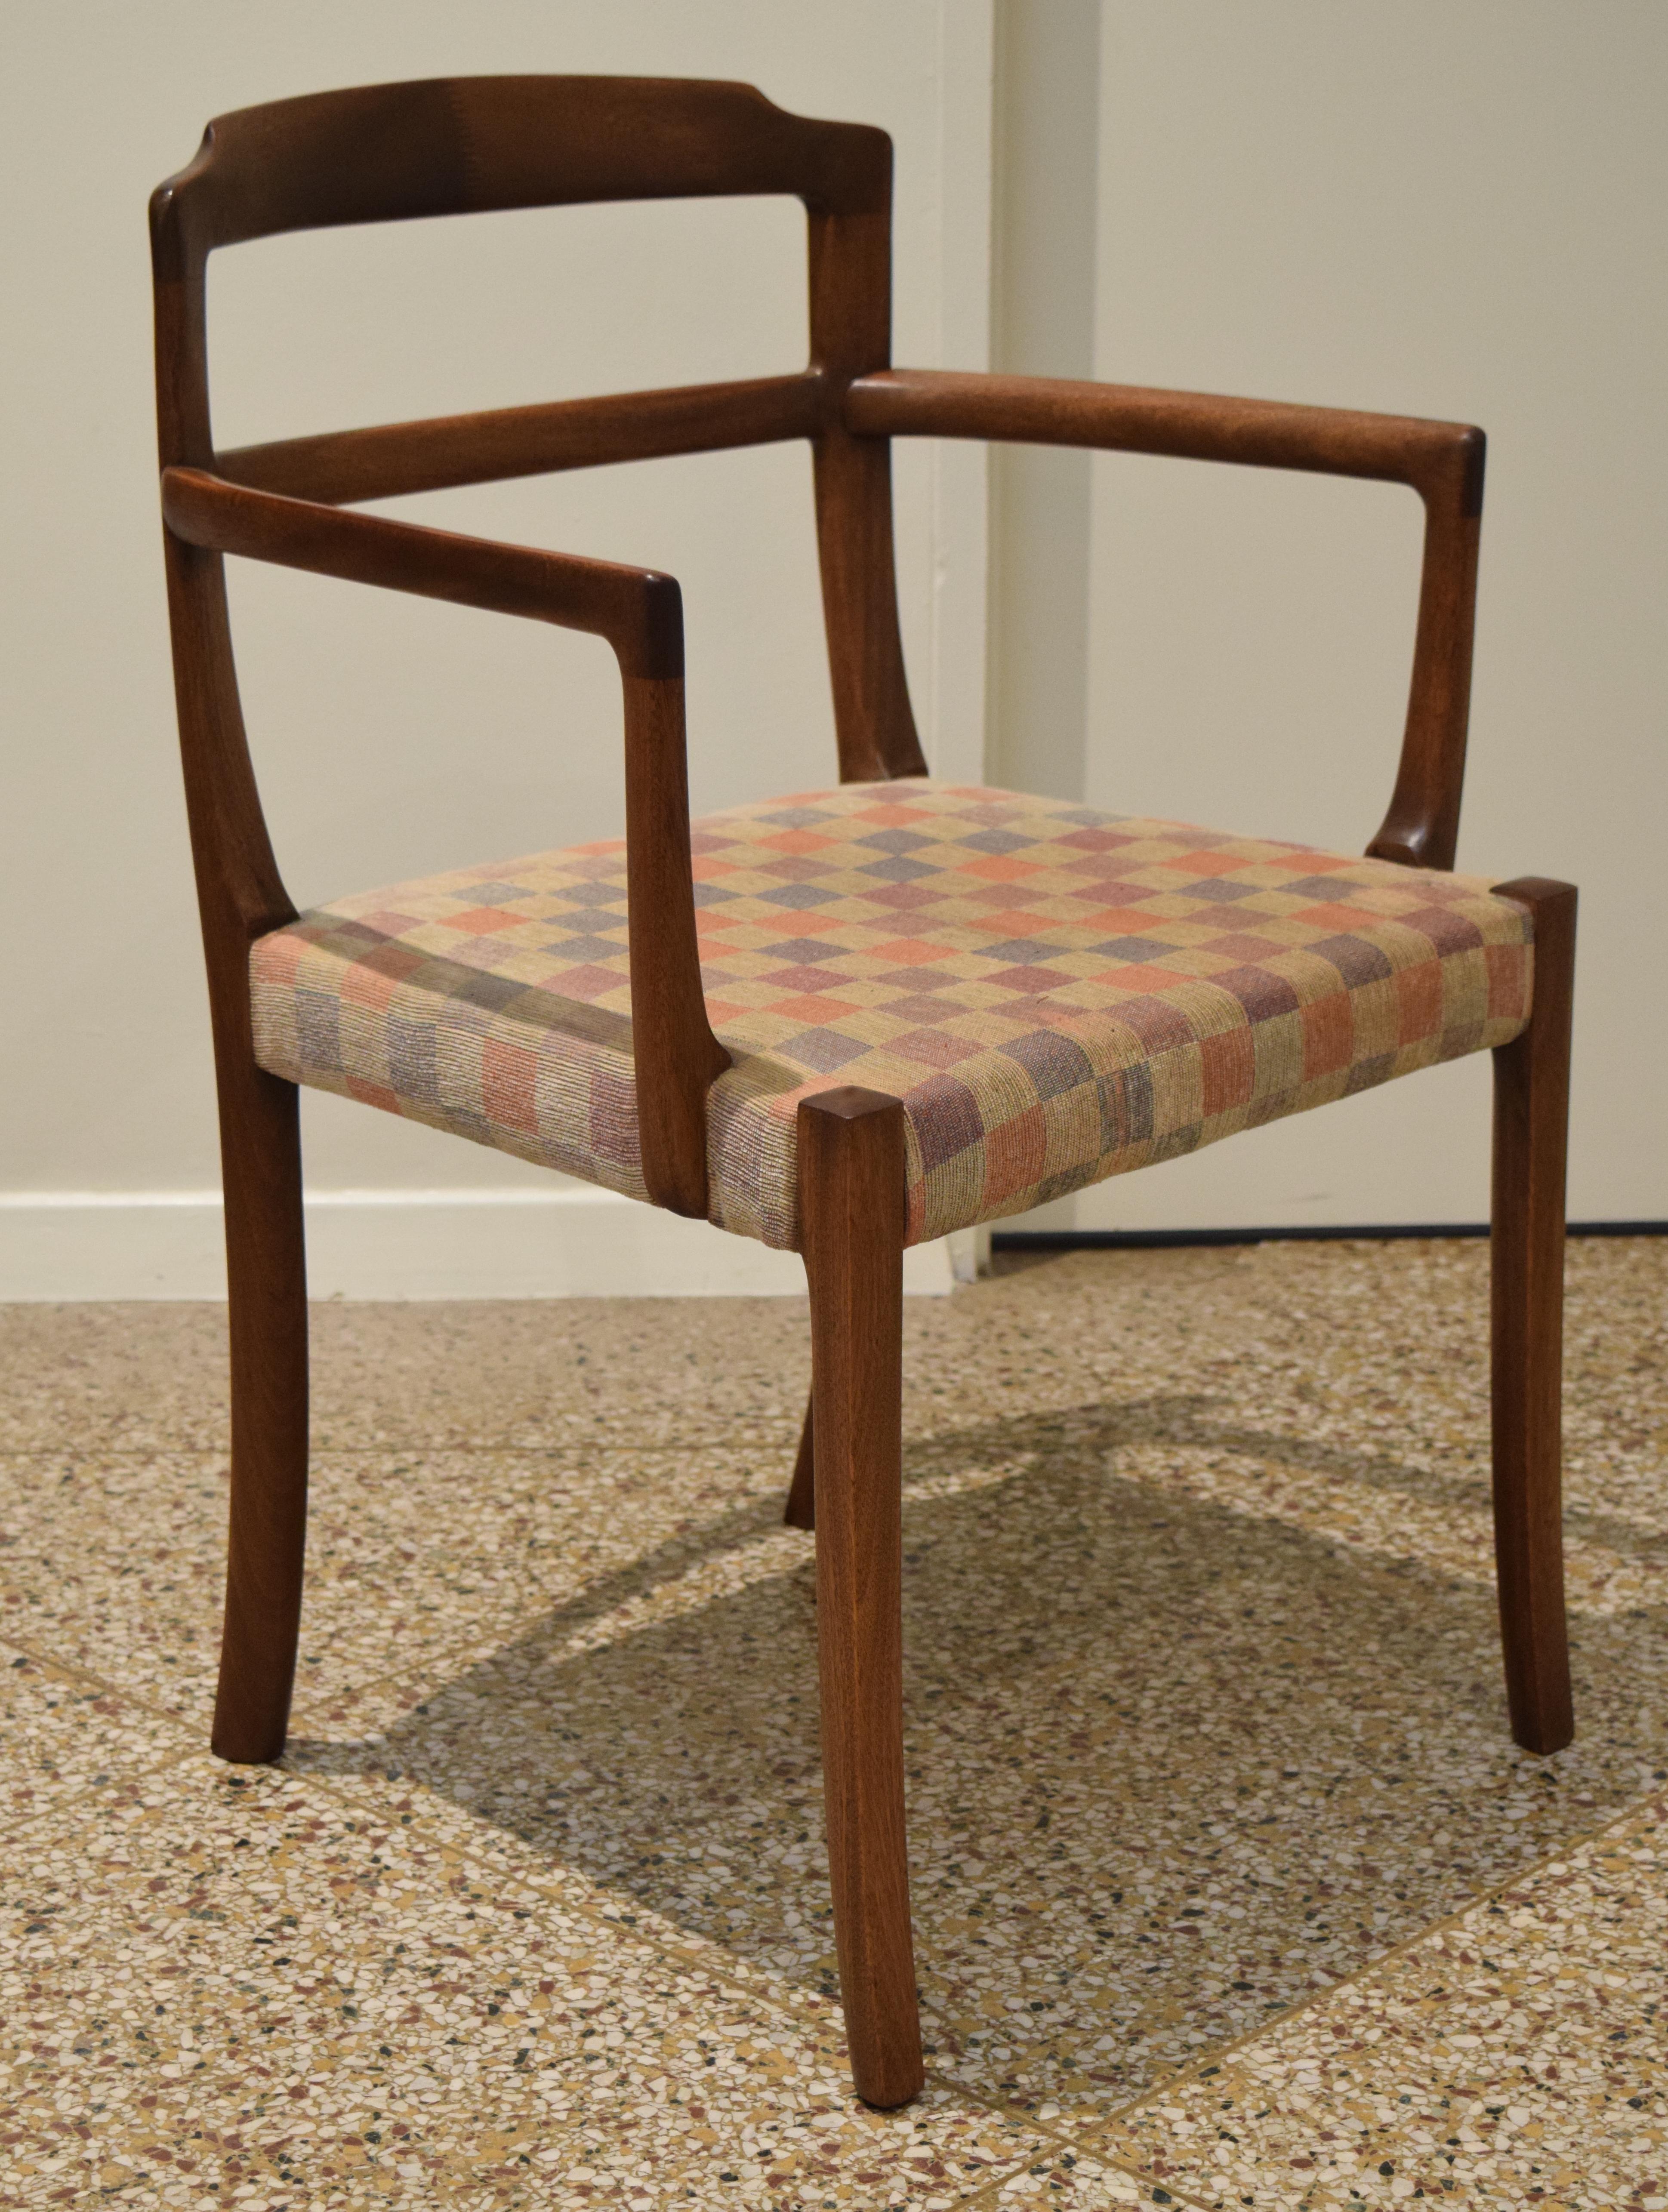 Sculpted Chairs by Ole Wanscher In Good Condition For Sale In Princeton, NJ